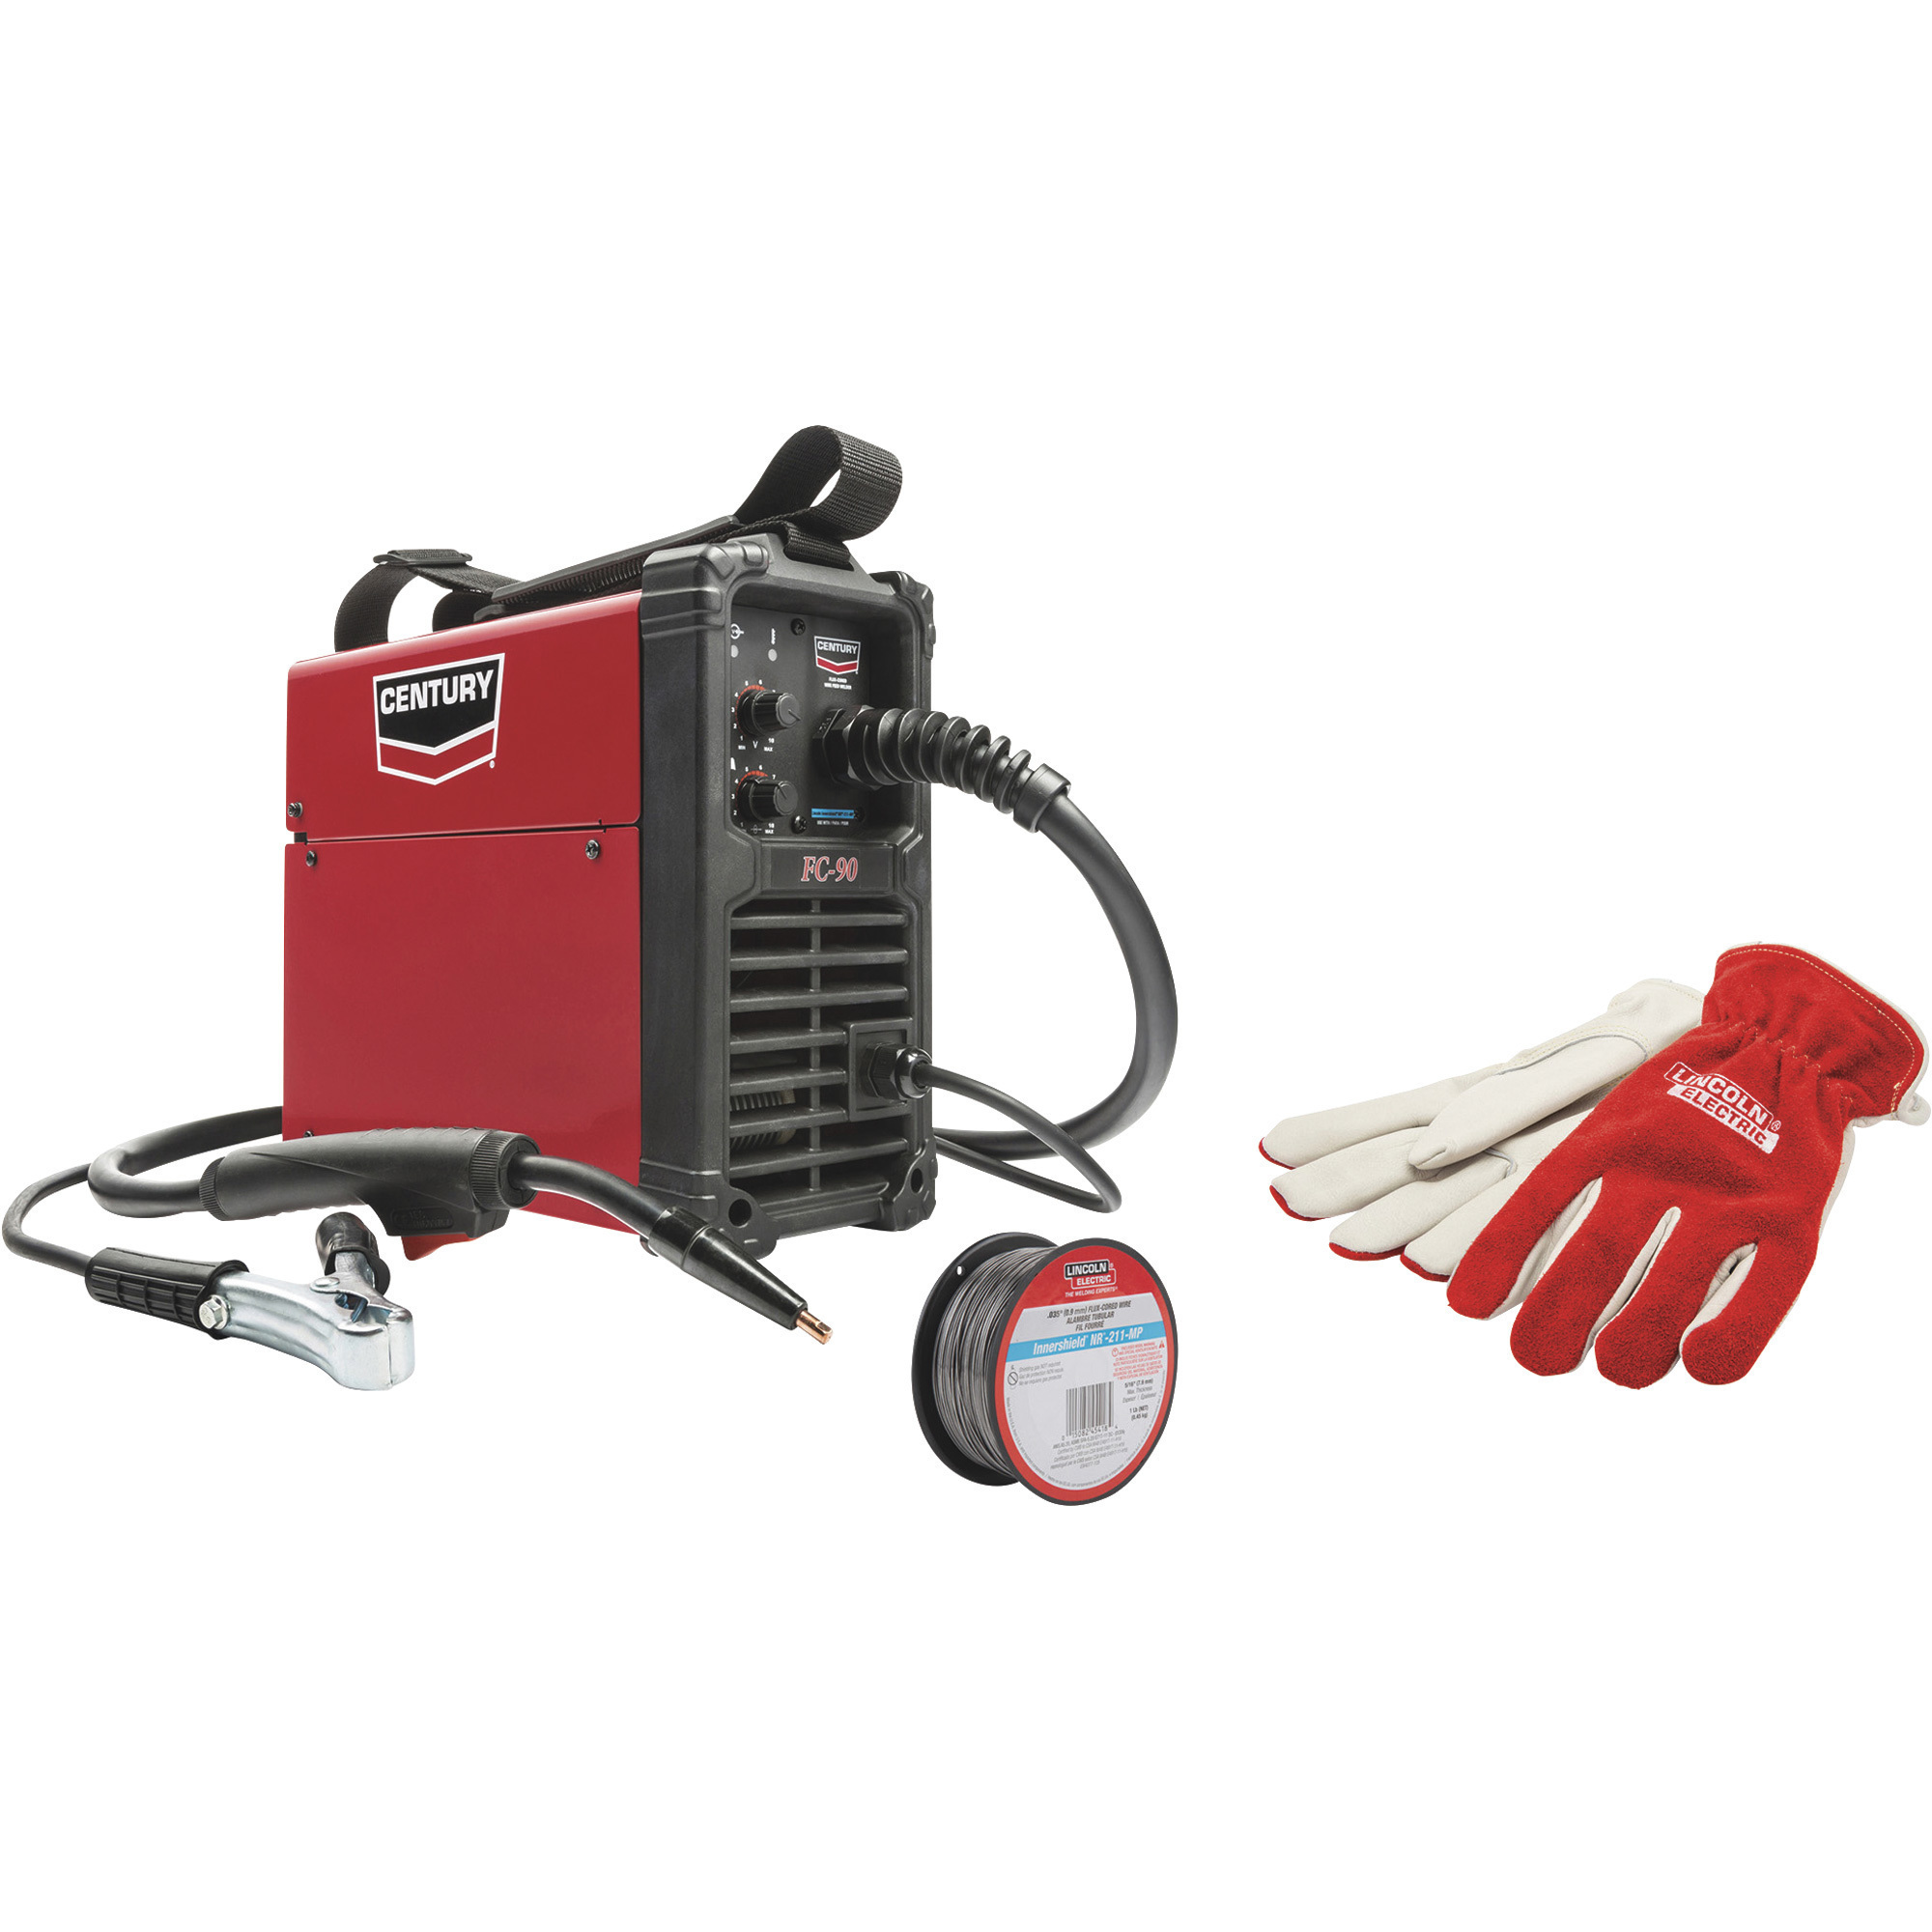 Lincoln Electric FC 90 Flux-Core Wire Feed Welder Kit, Includes XL Metal-Working  Gloves and Flux-Core Welding Wire Combo Pack, Model# K5387-1